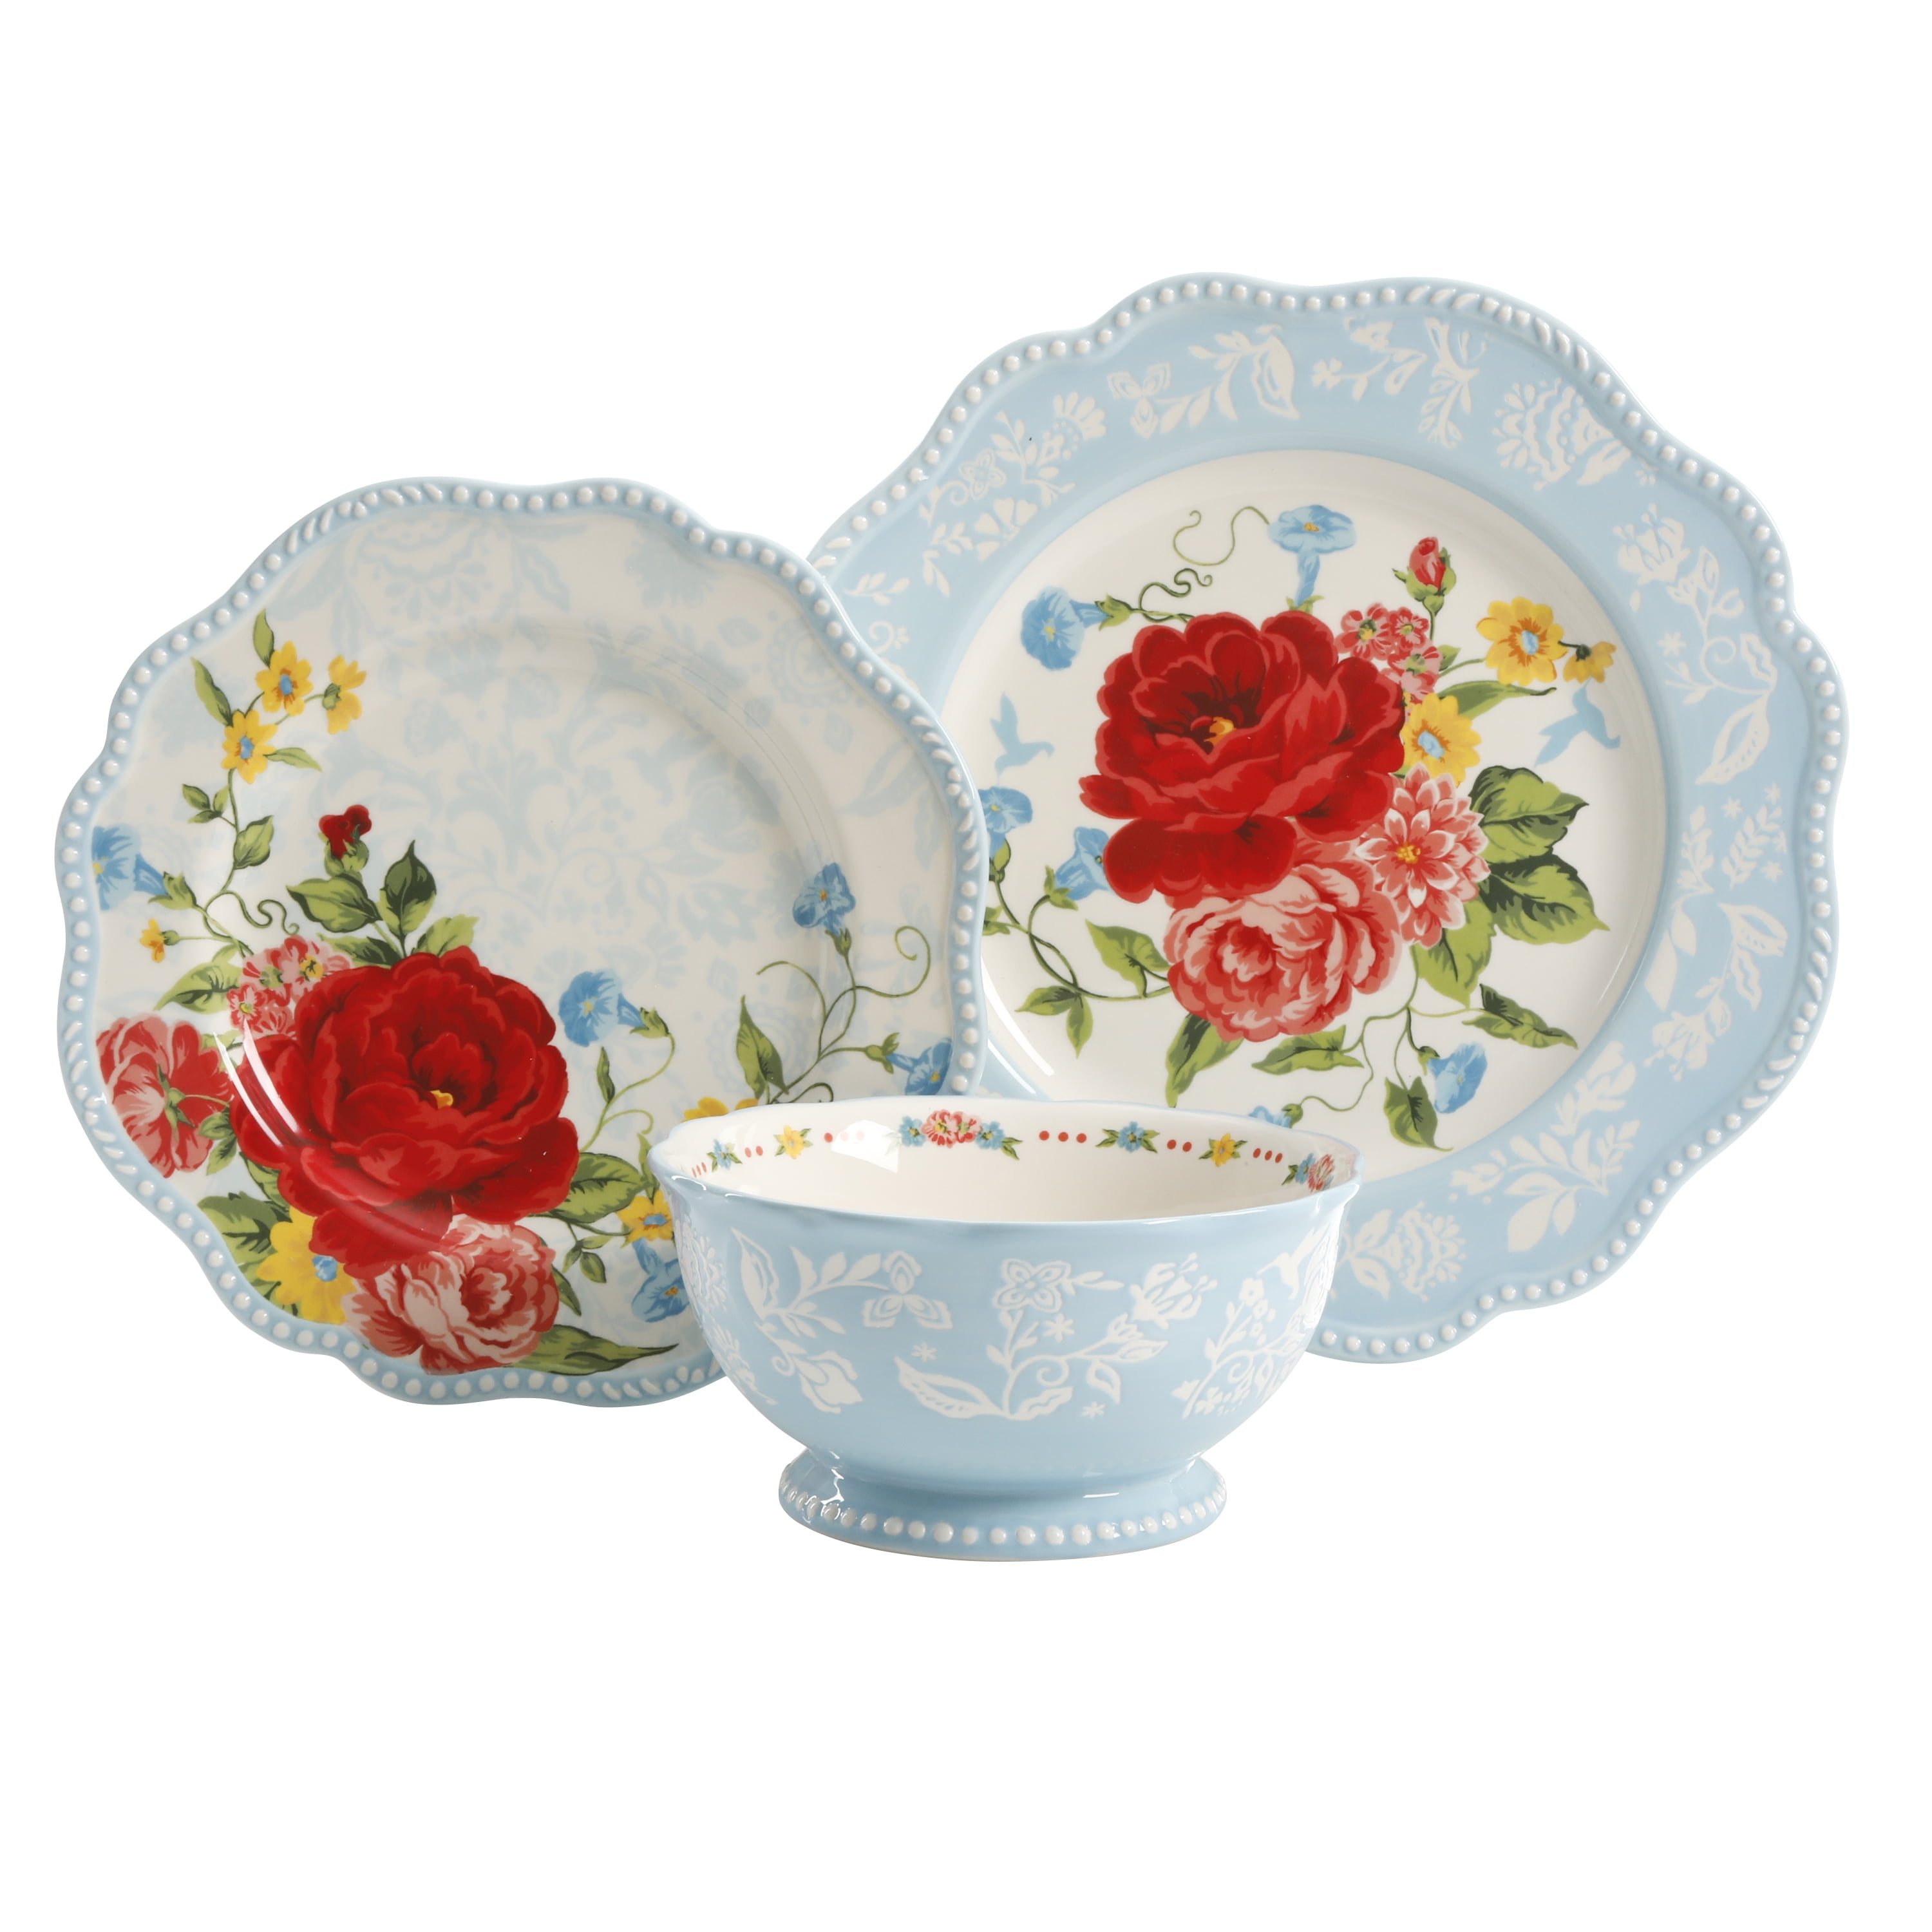 The Pioneer Woman Sweet Rose 12.8 x 8.7 inch Baker with Lid